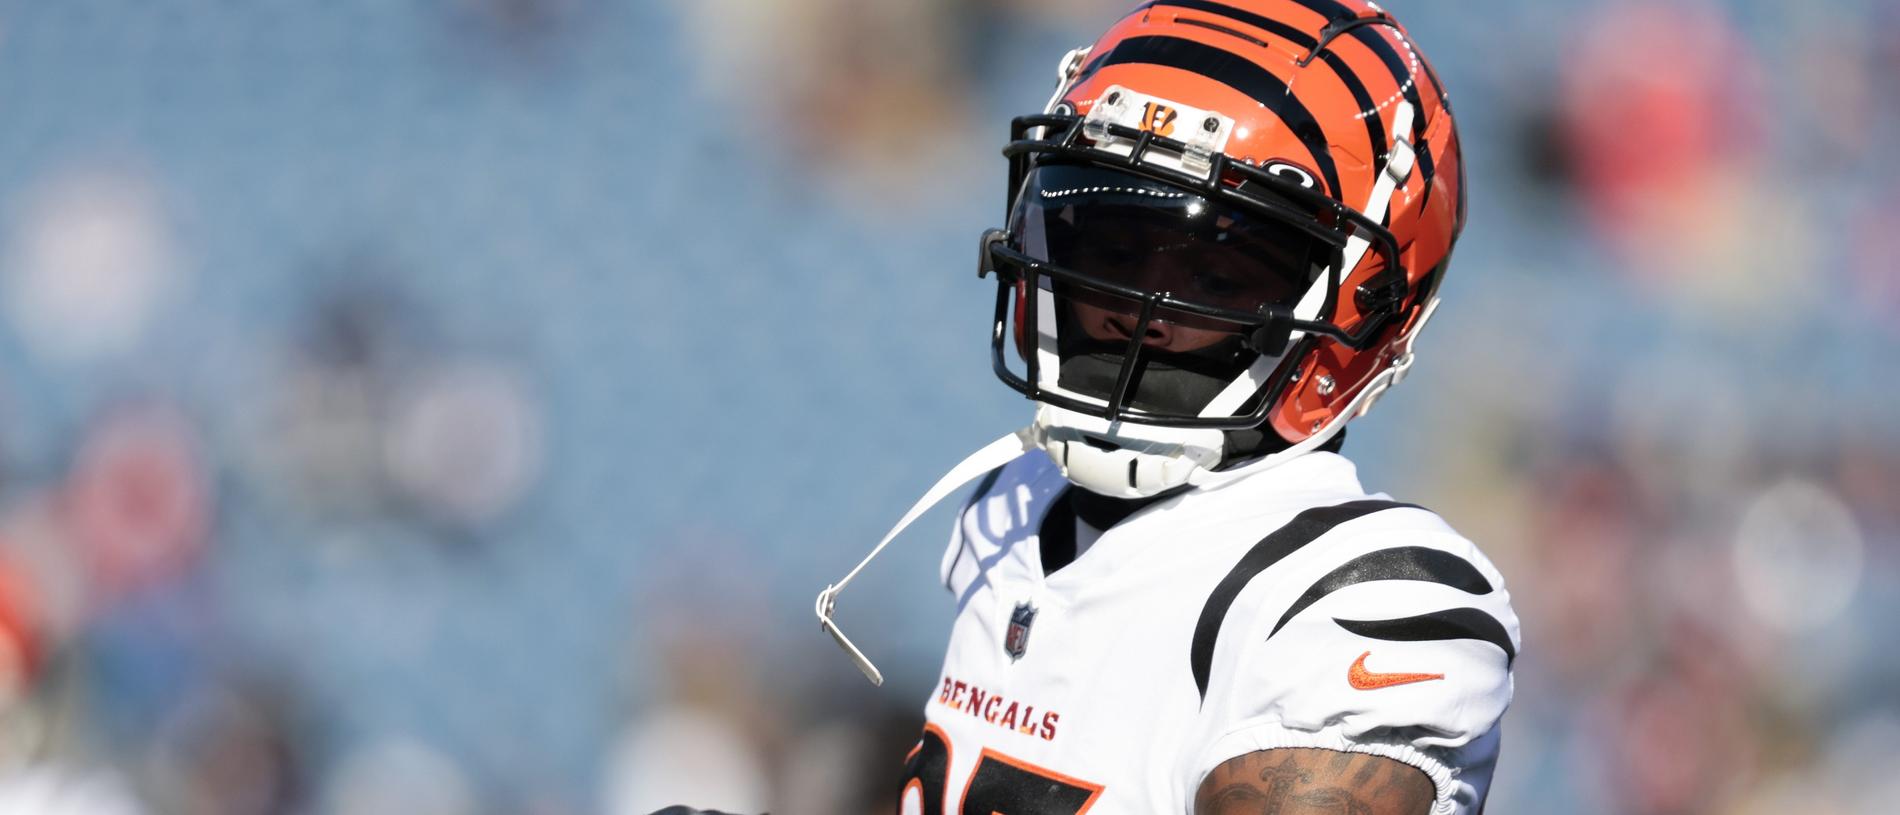 Bengals' Higgins Opens Up About Moment Bills' Hamlin Collapsed